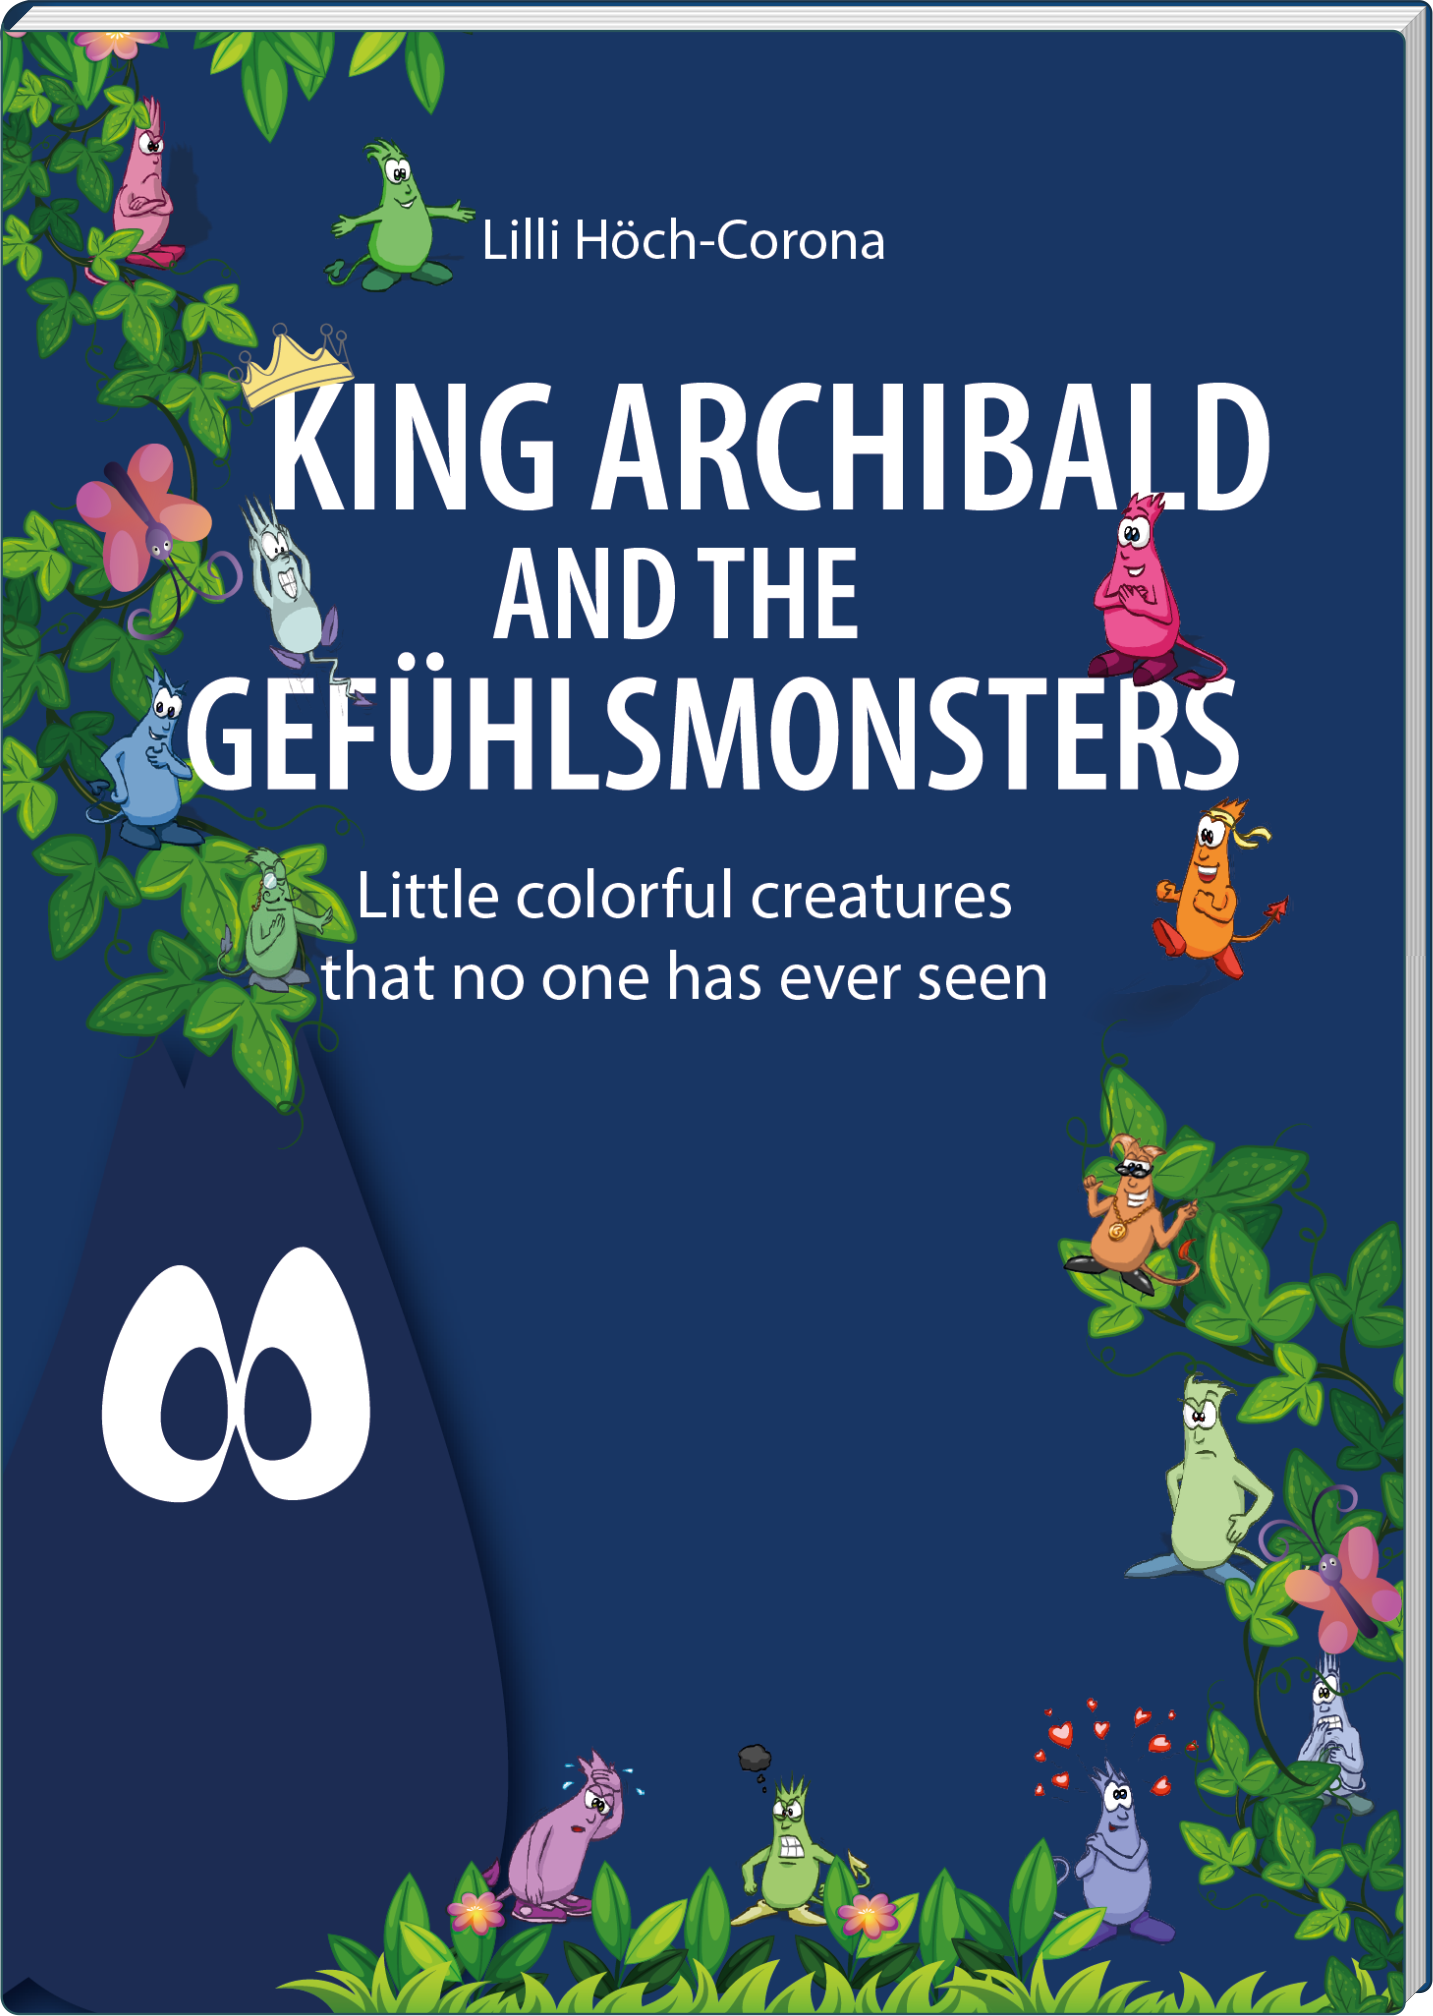 New book: King Archibald and the Gefühlsmonsters